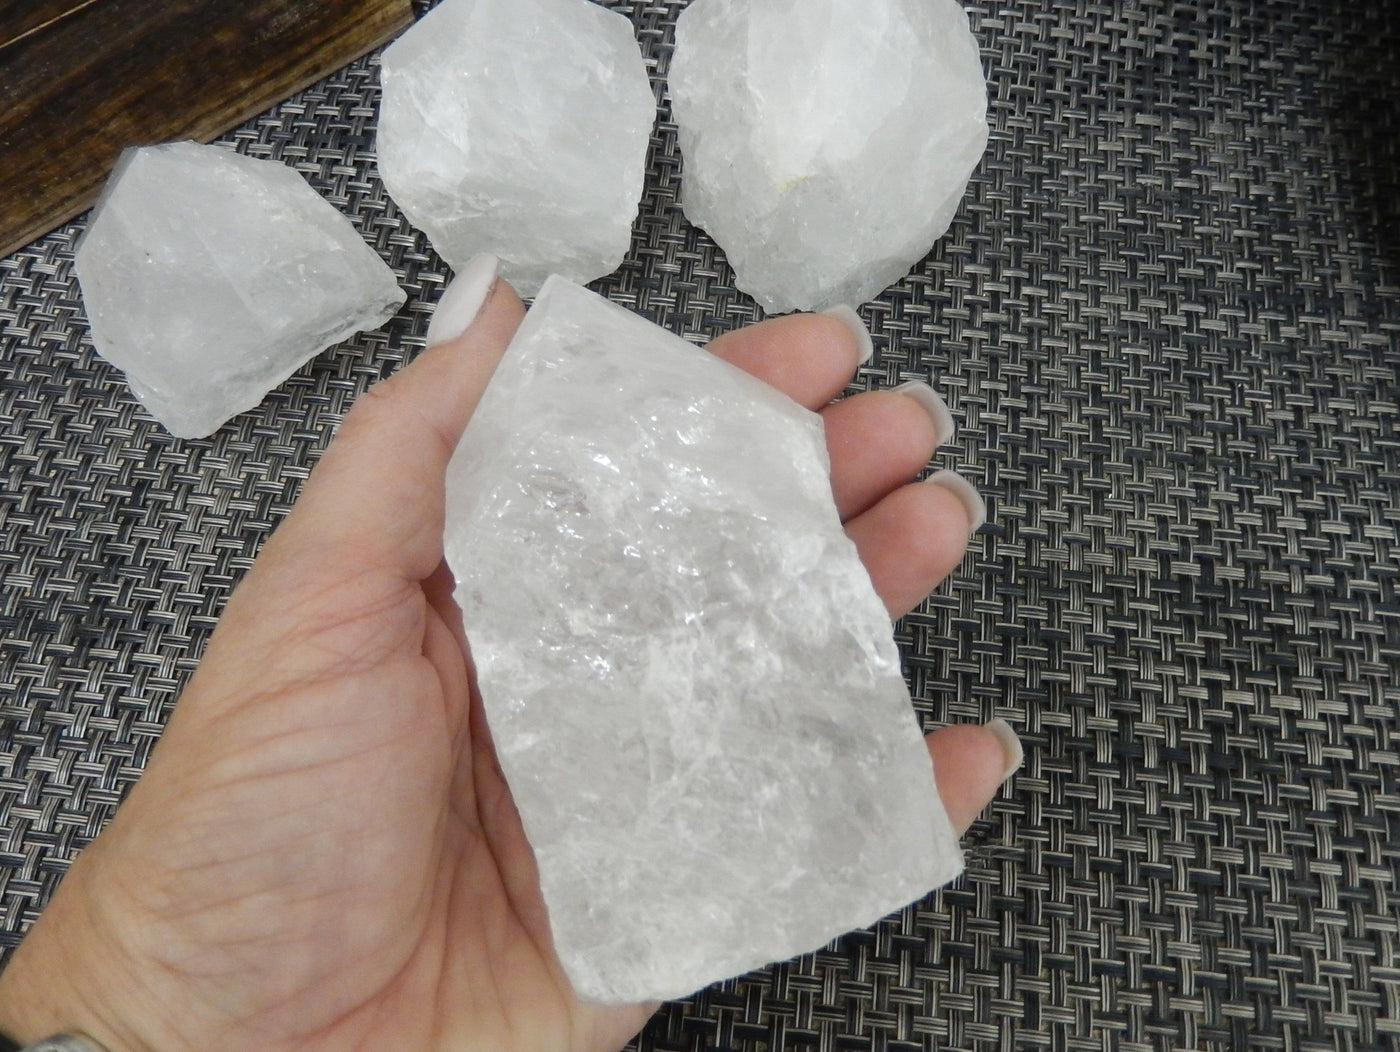 Crystal Quartz Semi Polished Points with a size 400-500g in a hand for size reference